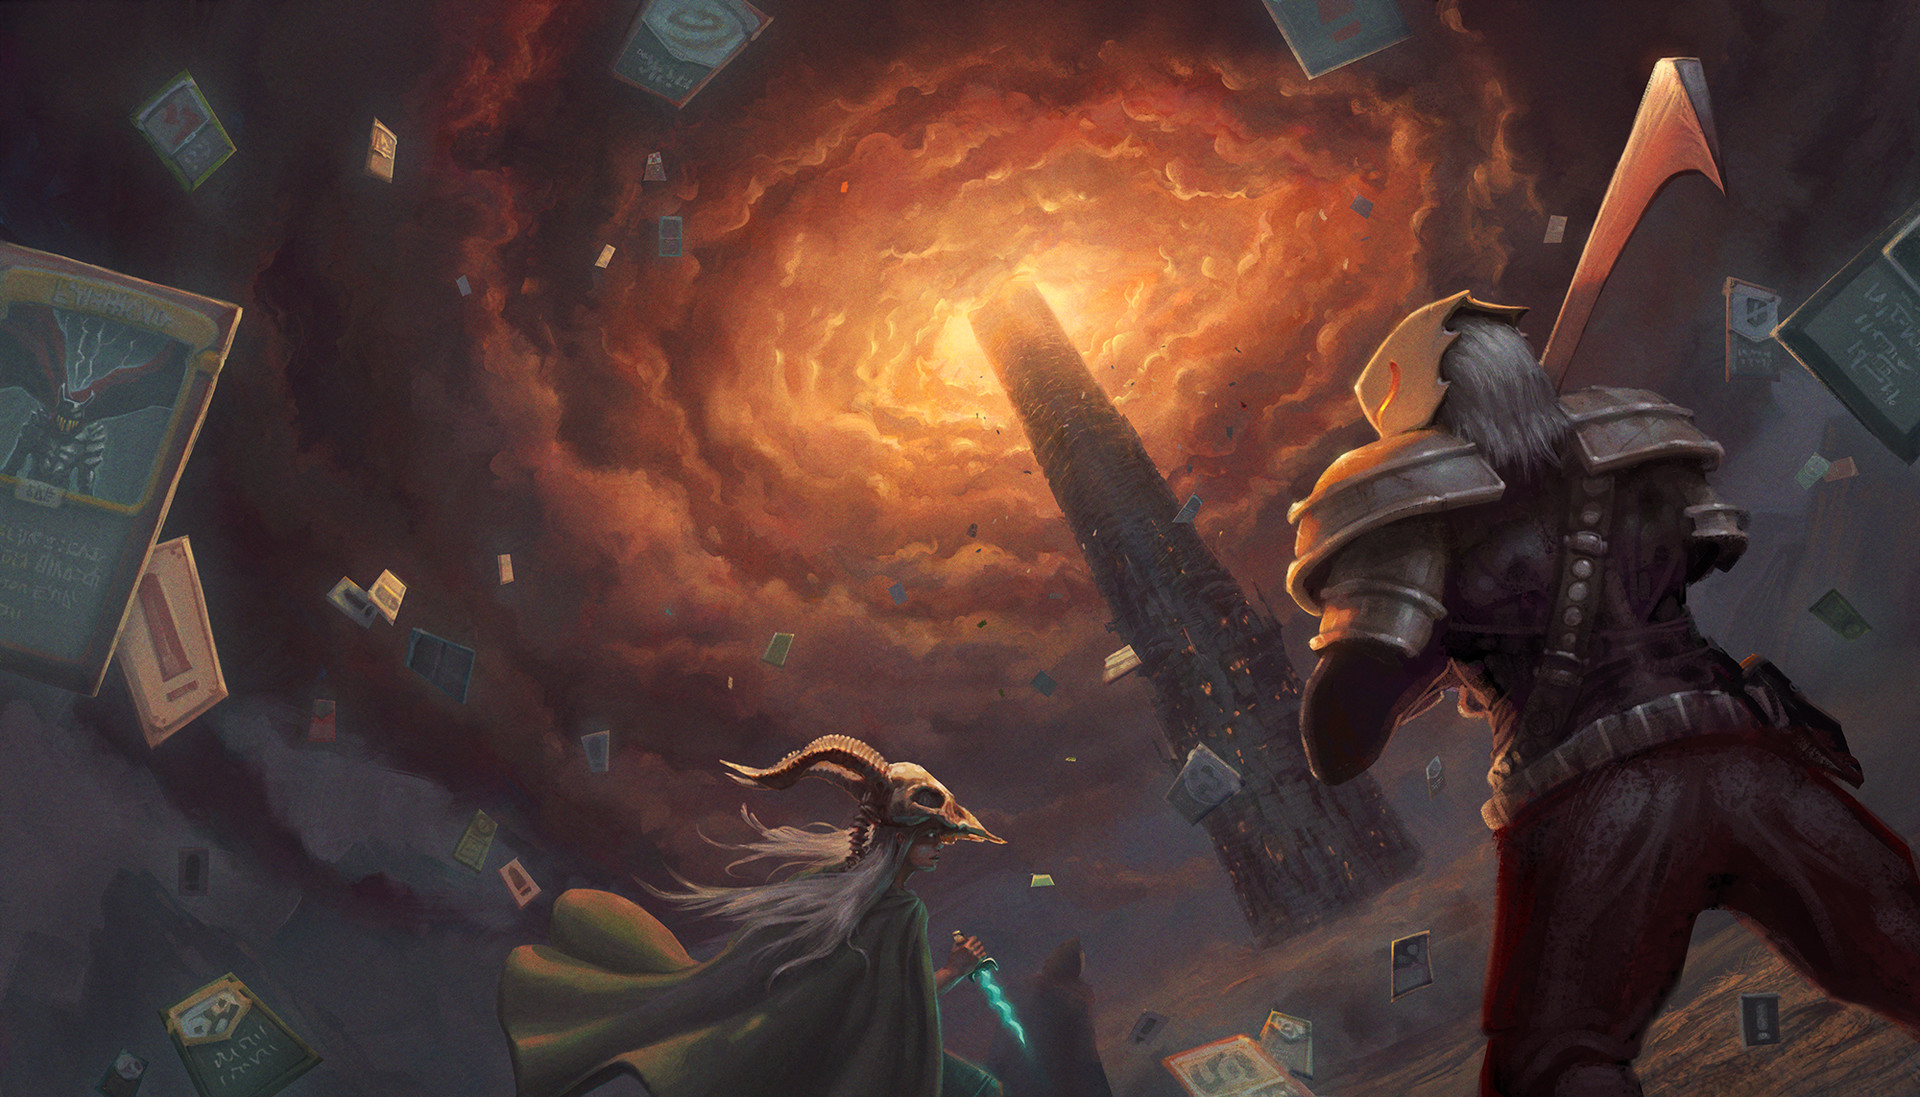 HD desktop wallpaper from Slay the Spire featuring a knight facing off against a robed figure under a swirling vortex with cards flying around.